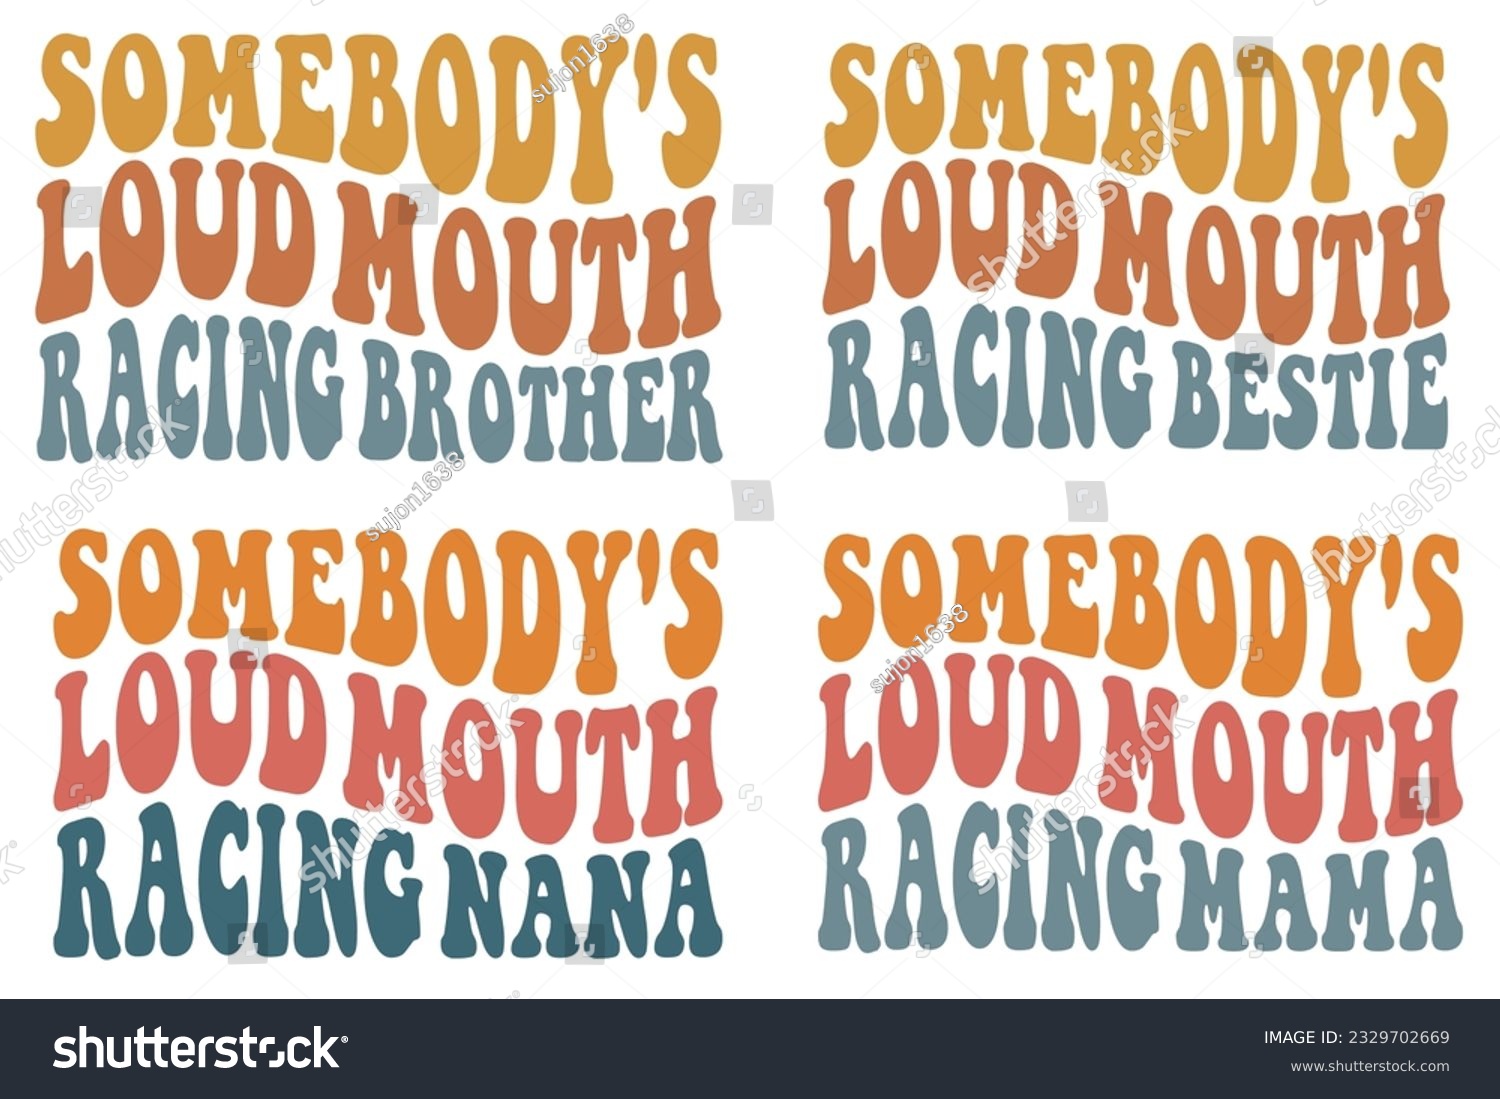 SVG of Somebody's Loud Mouth Racing brother, Somebody's Loud Mouth Racing bestie, Somebody's Loud Mouth Racing Nana, Somebody's Loud Mouth Racing mama retro wavy SVG t-shirt designs svg